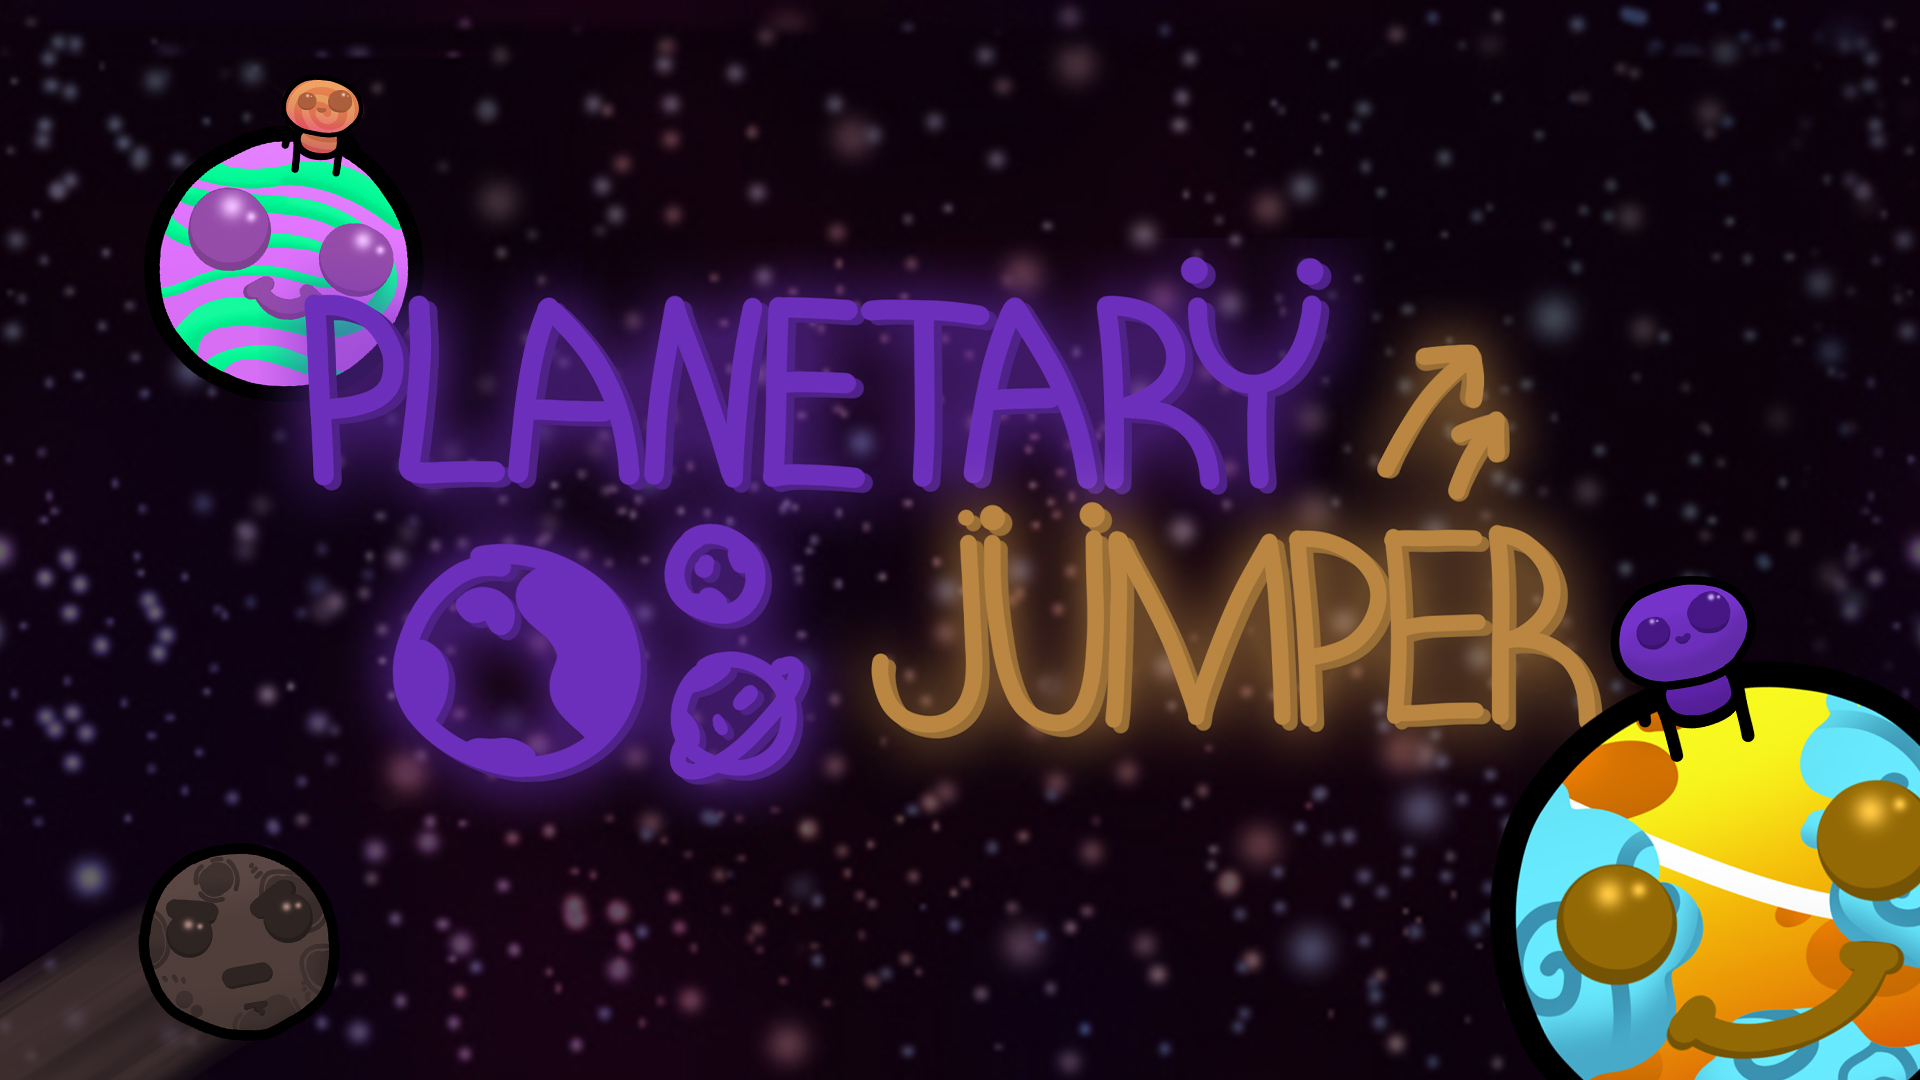 Planetary Jumper: Jump on the planets